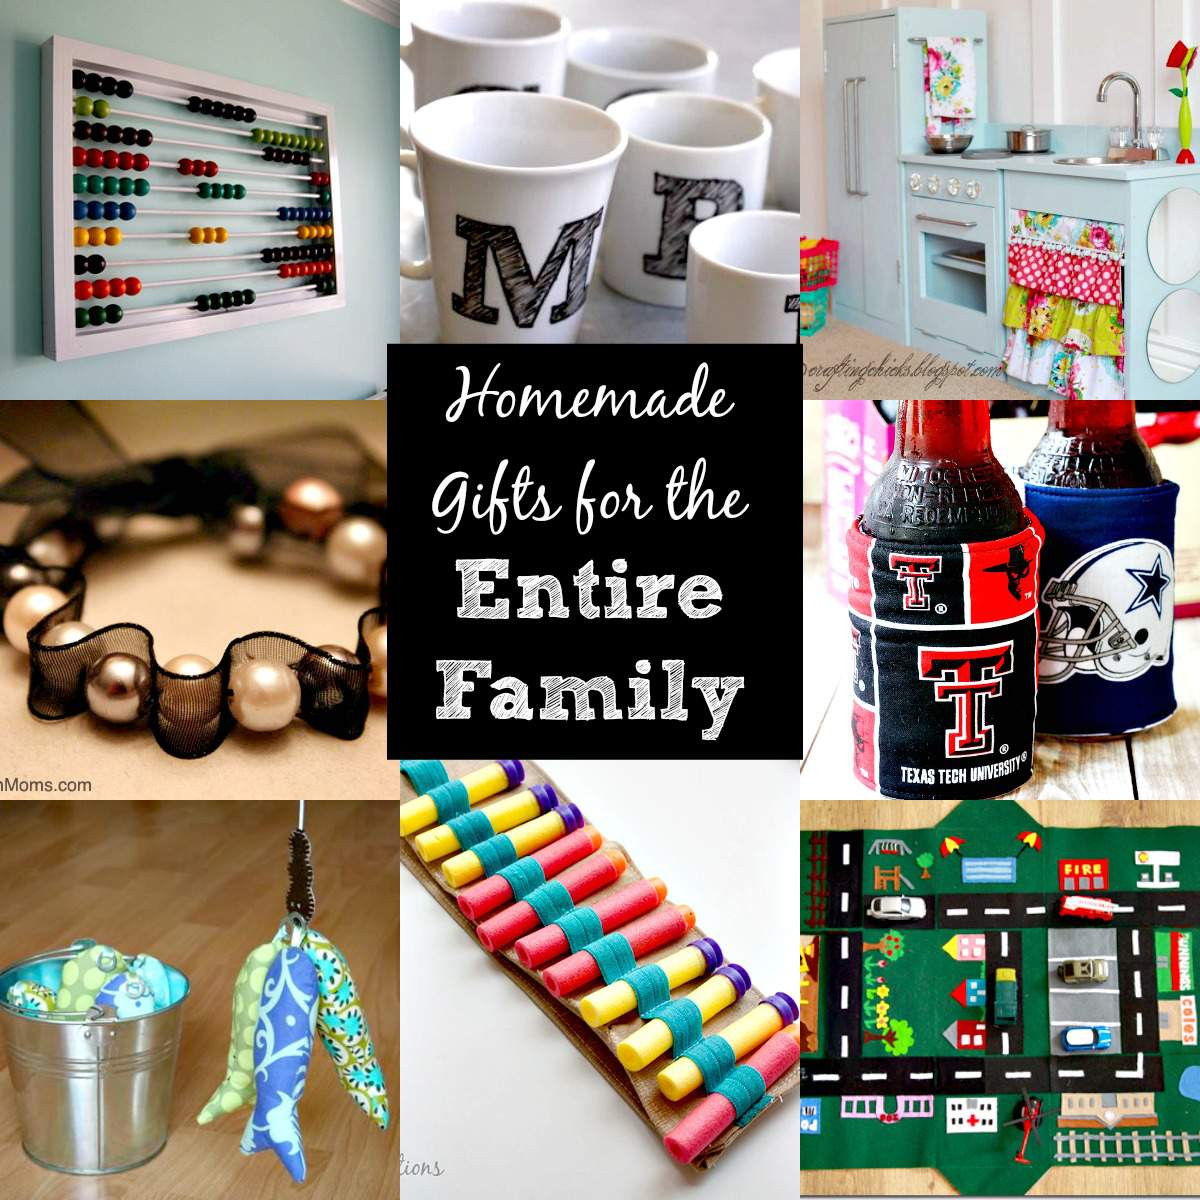 DIY Family Christmas Gifts
 DIY Christmas Gift Ideas for the Entire Family – over 30